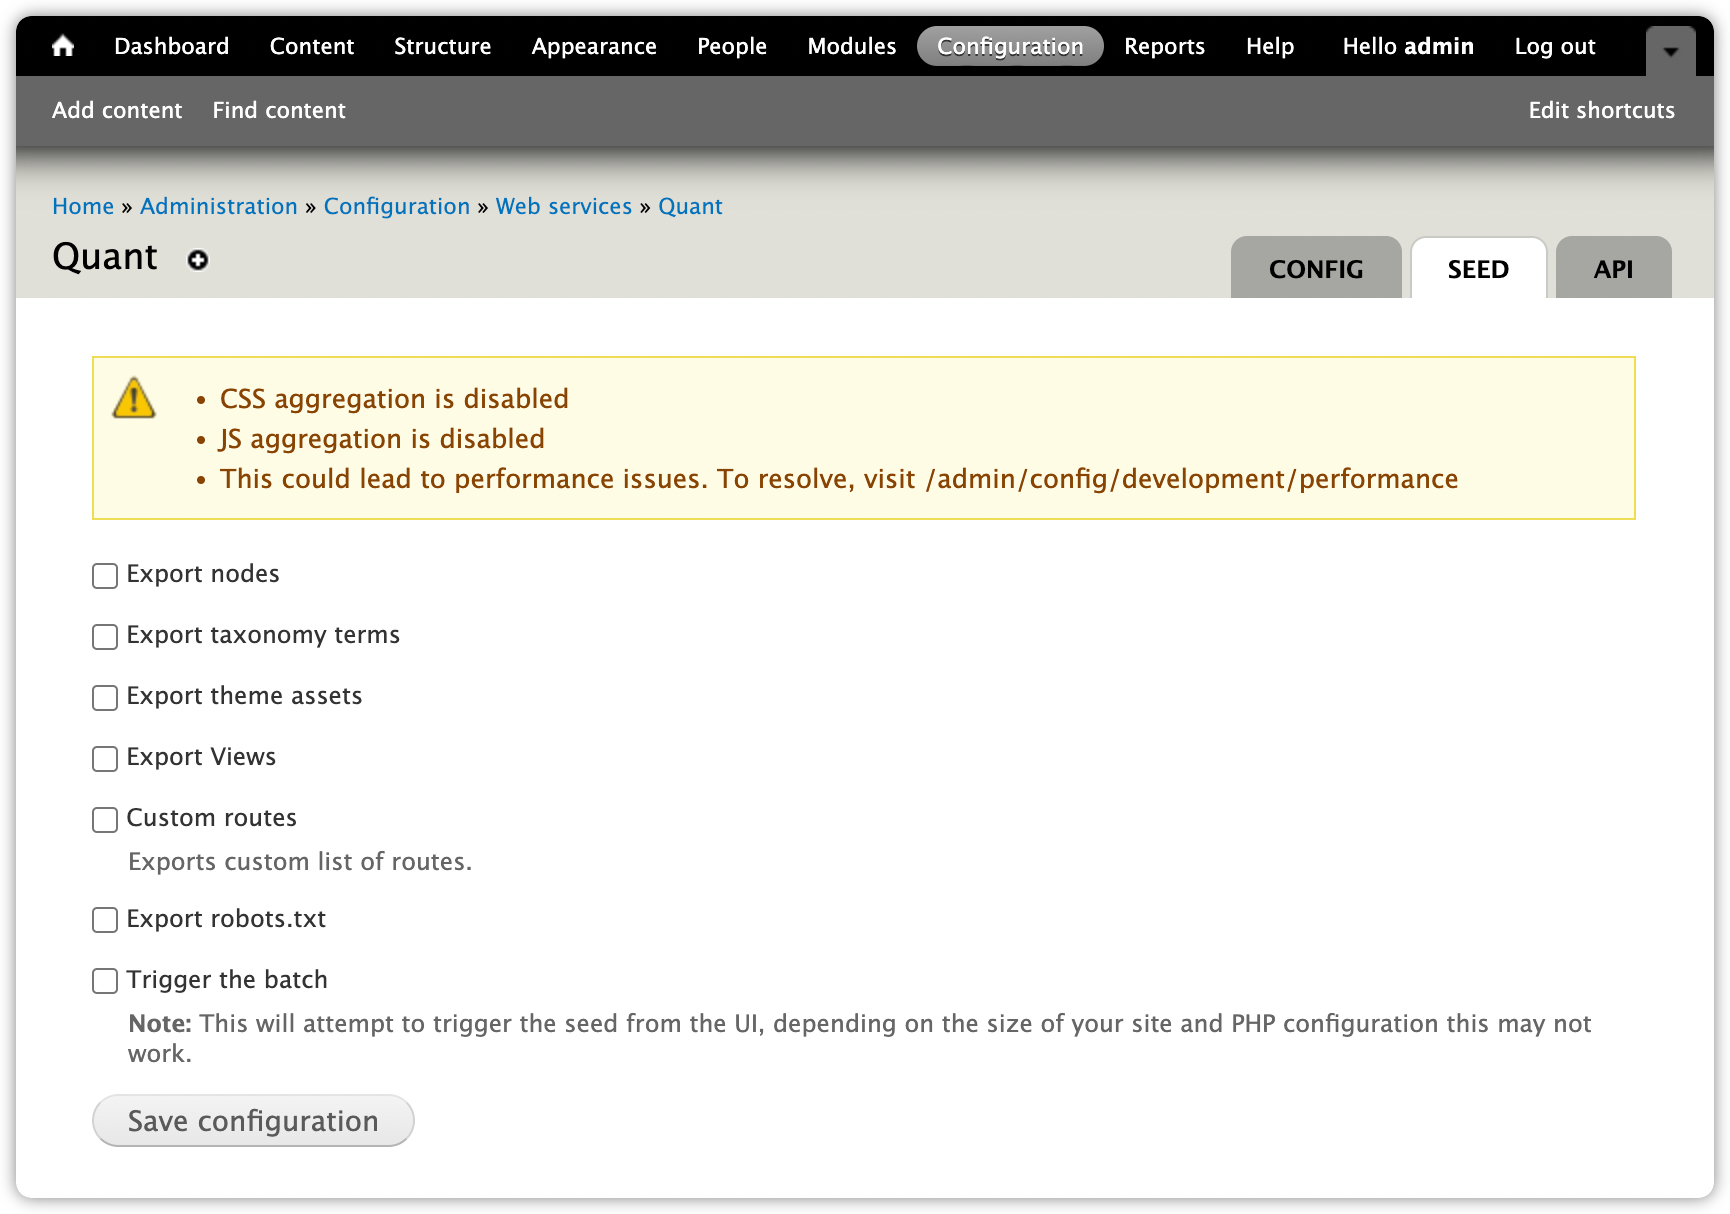 Quant Drupal 7 seed configuration page upon install